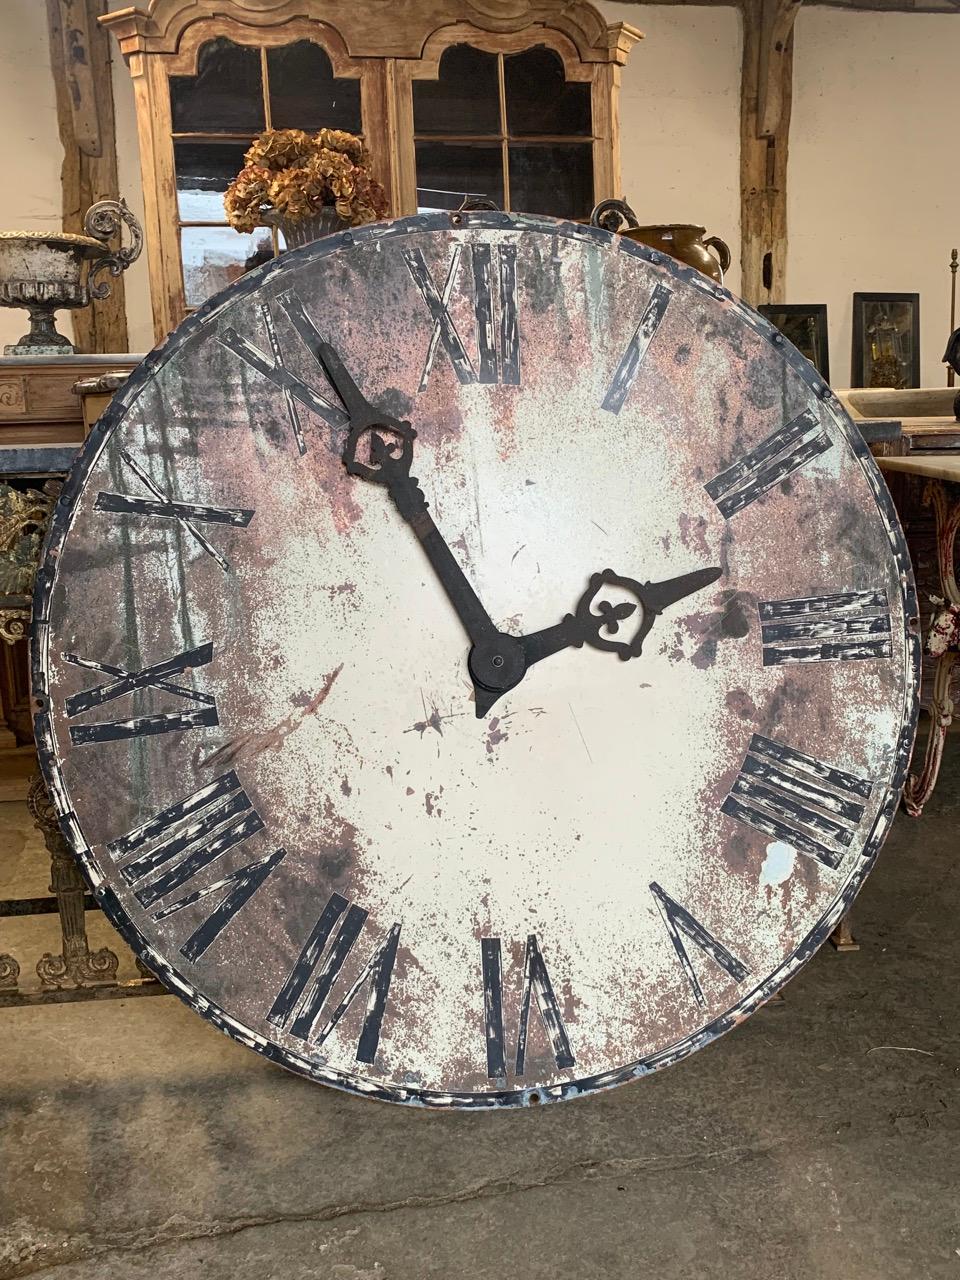 A stunning large French tower clock face made from painted copper. It still has its original metal hands and has been hand painted which has weathered over the years giving it a great look. This clock is not a working clock and is sold as decorative.